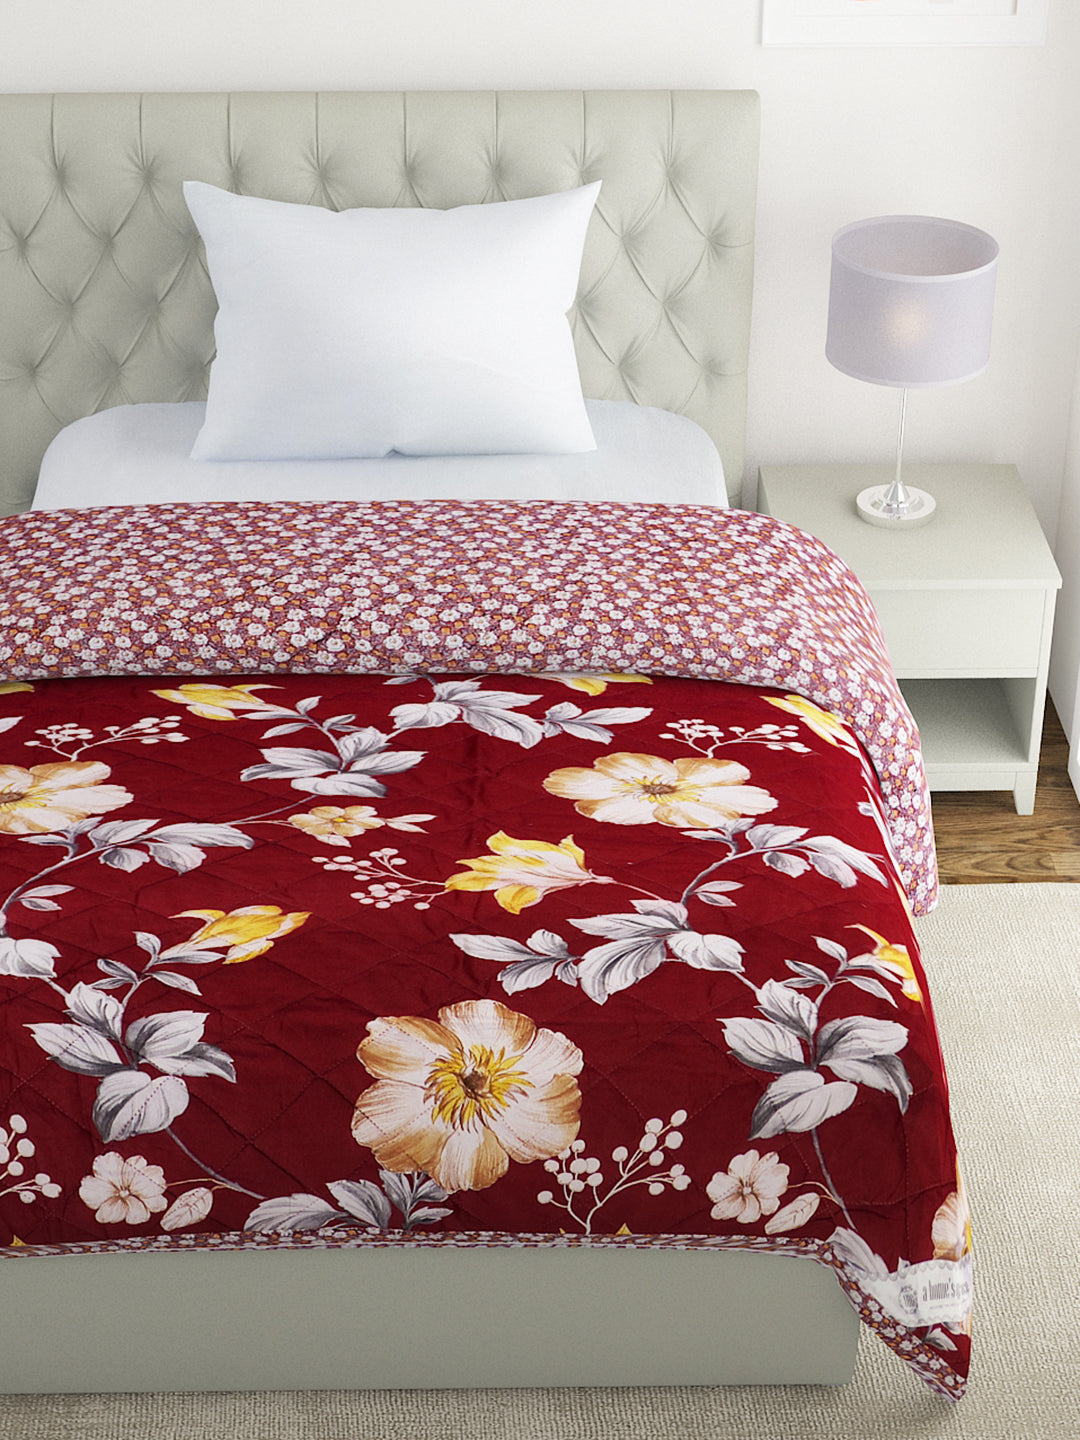 Floral Print Set of 2 Single Bed Light Weight Comforter-Maroon